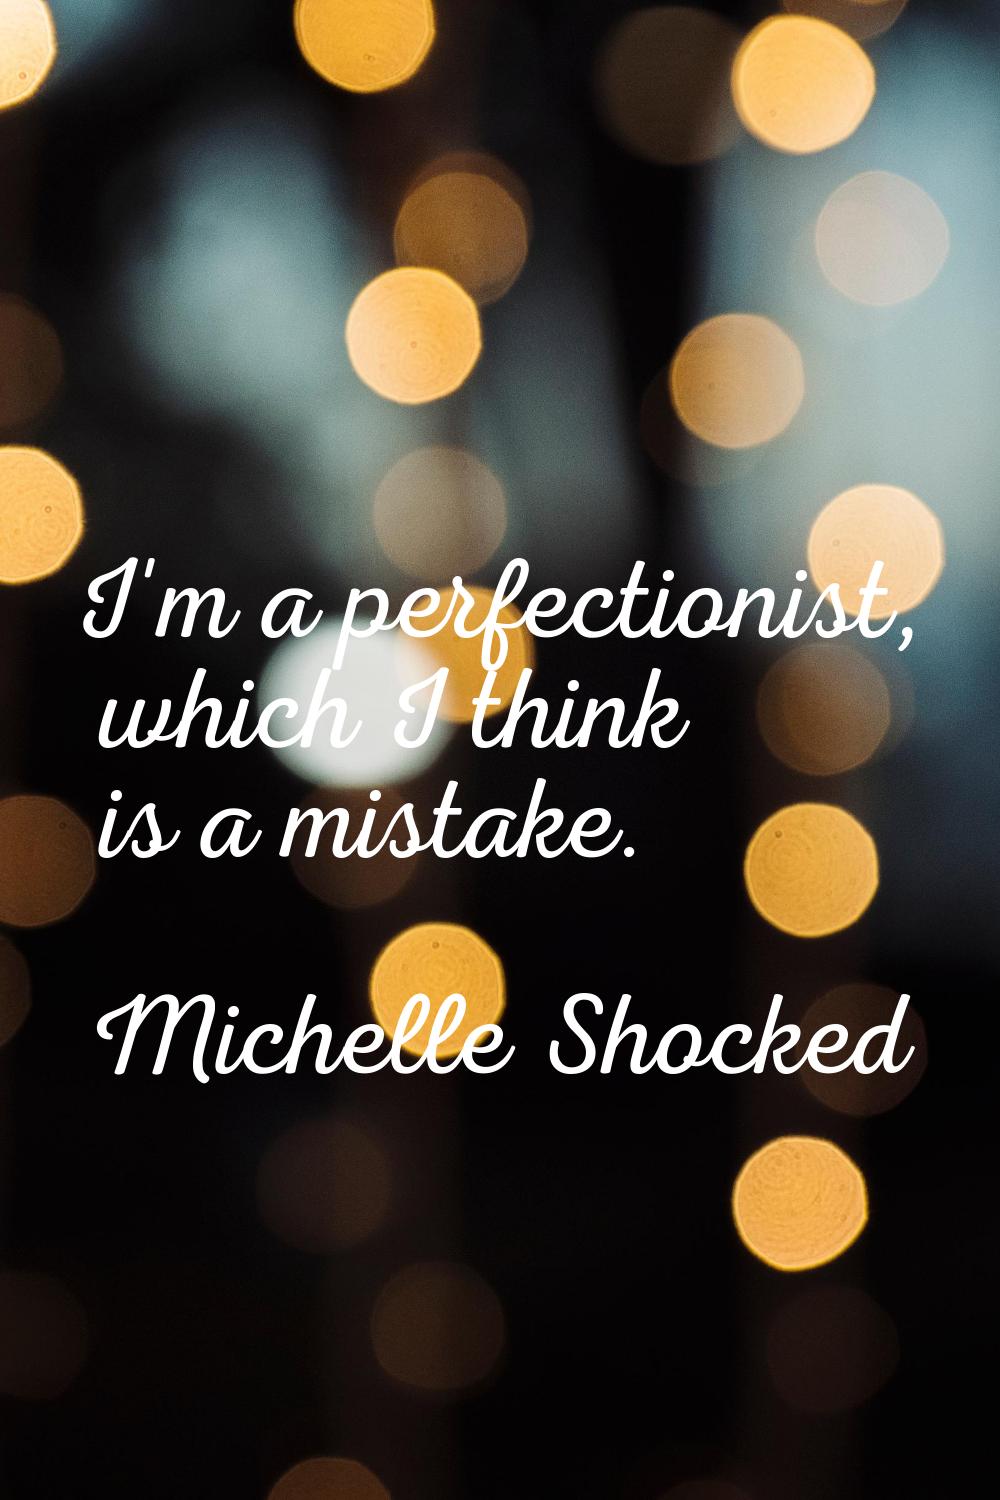 I'm a perfectionist, which I think is a mistake.